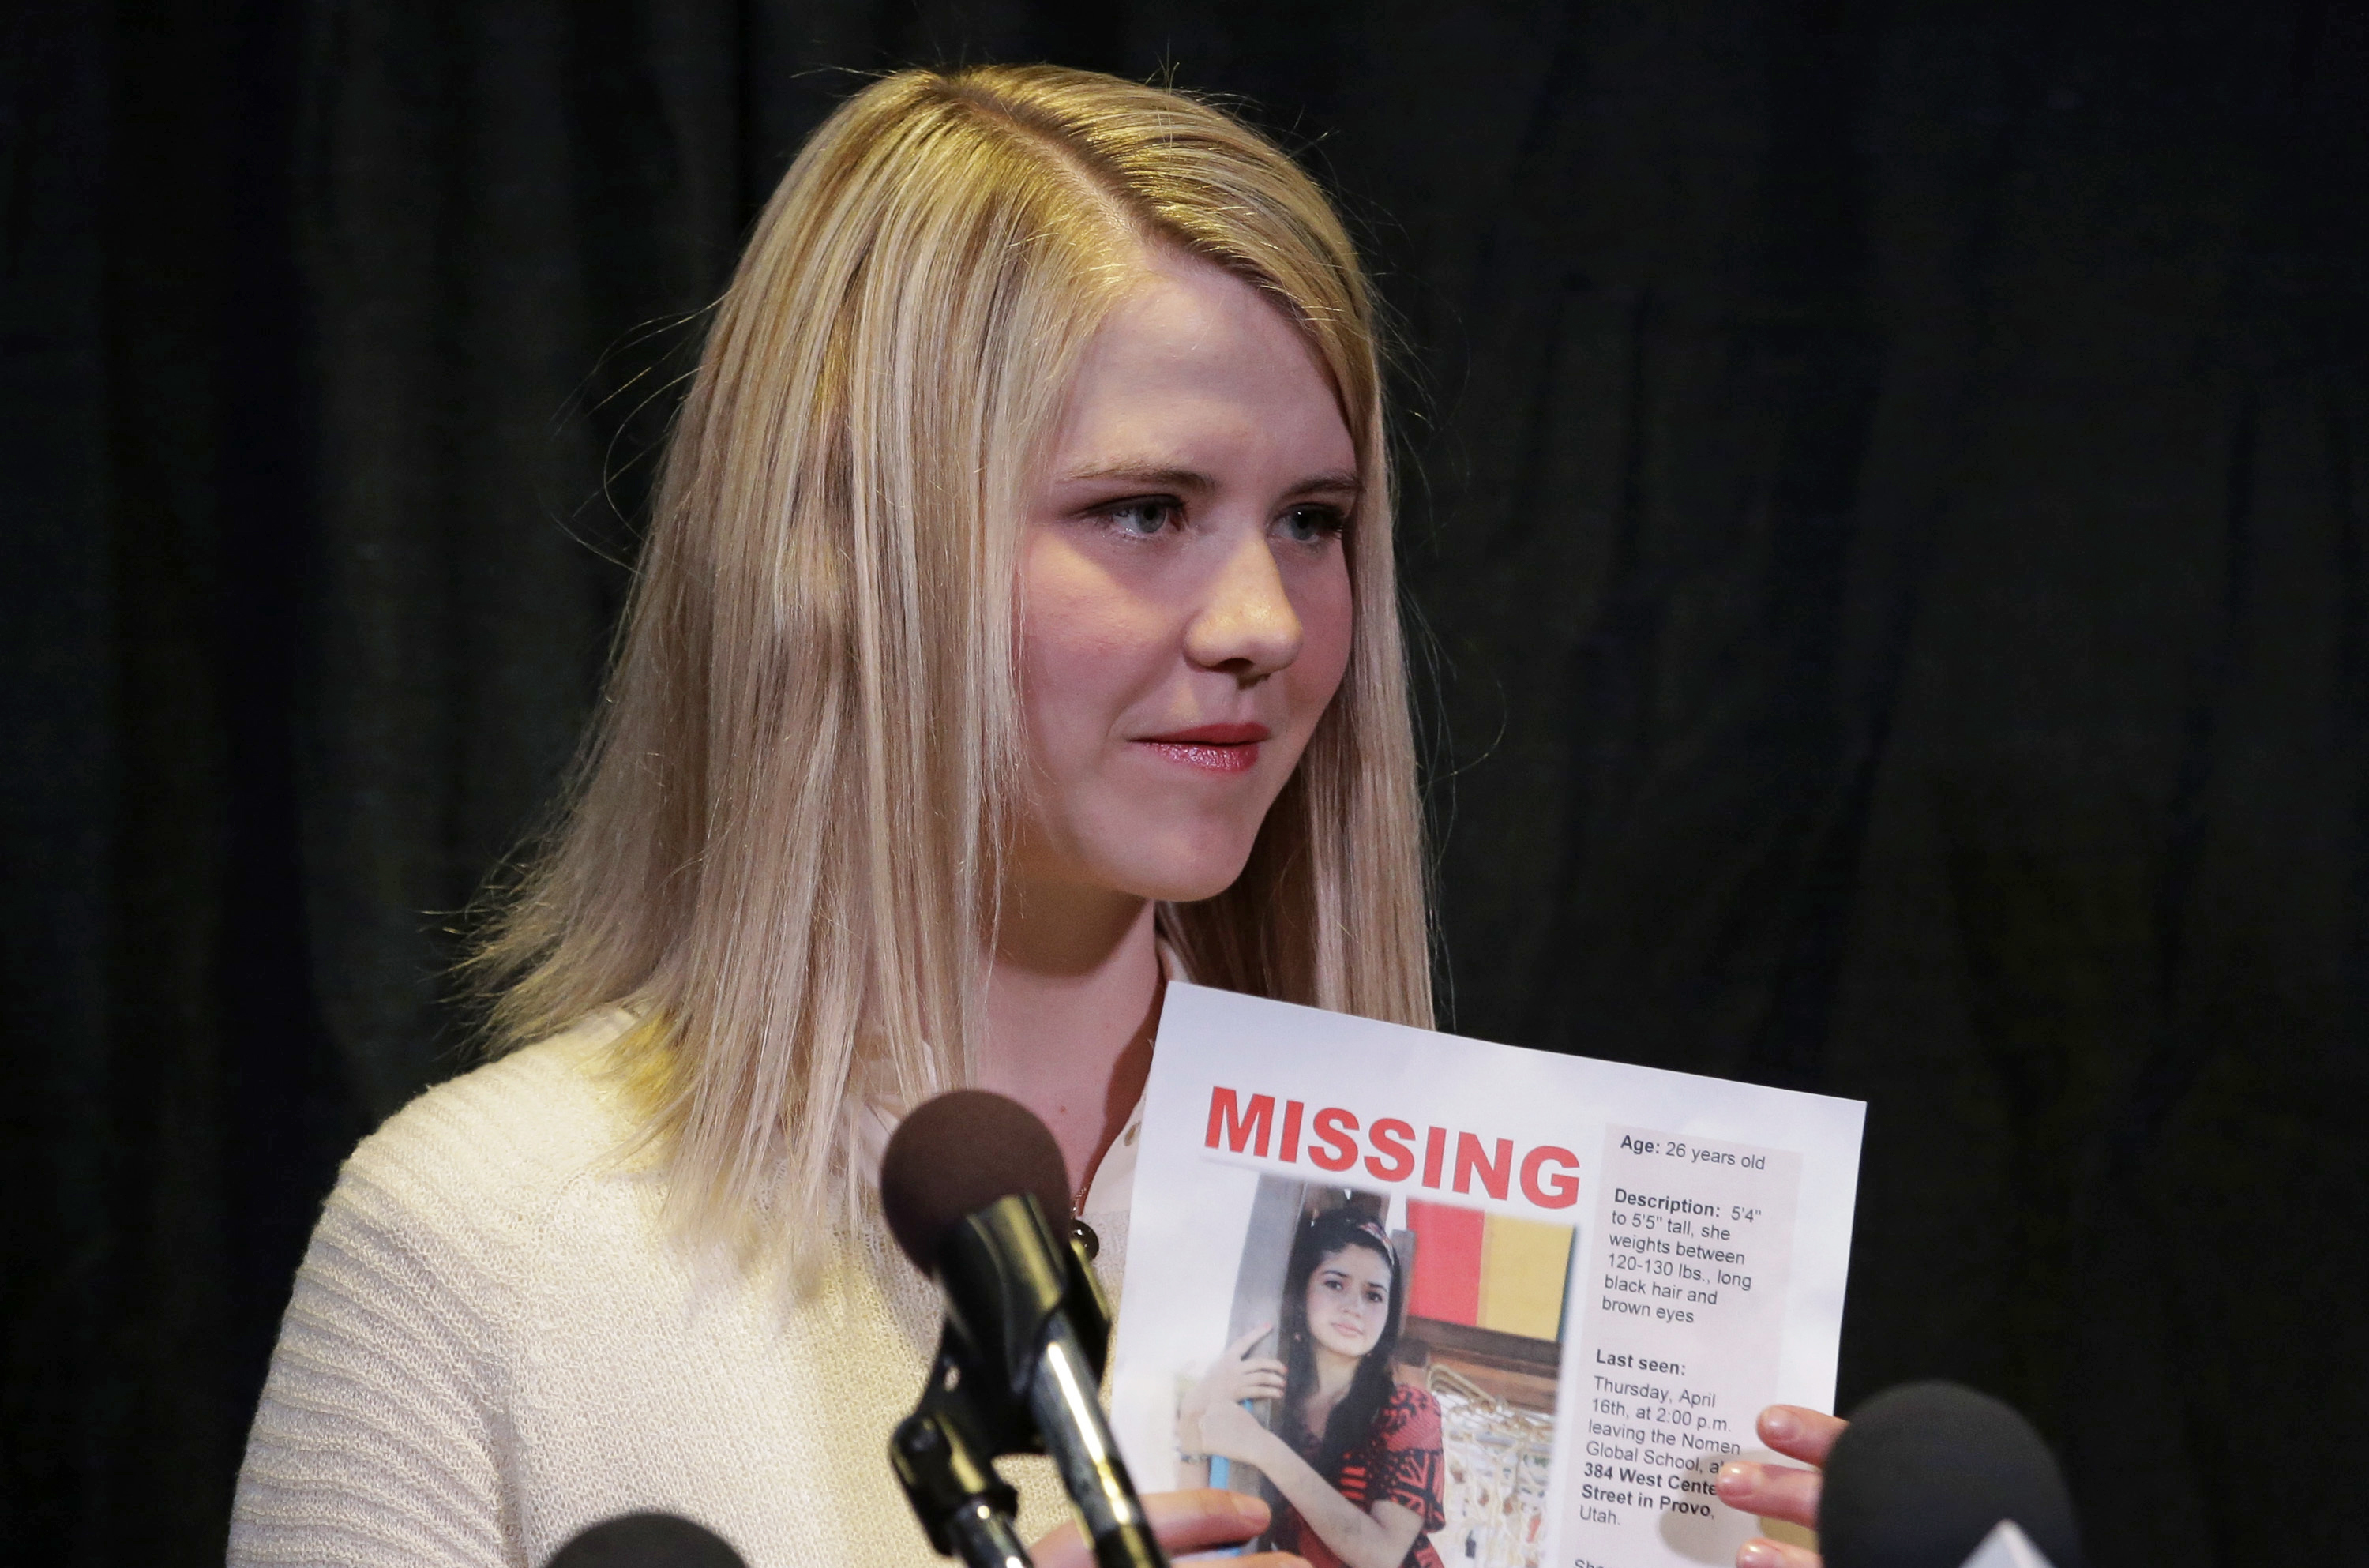 Woman Who Helped Kidnap Elizabeth Smart Will Be Released From Prison